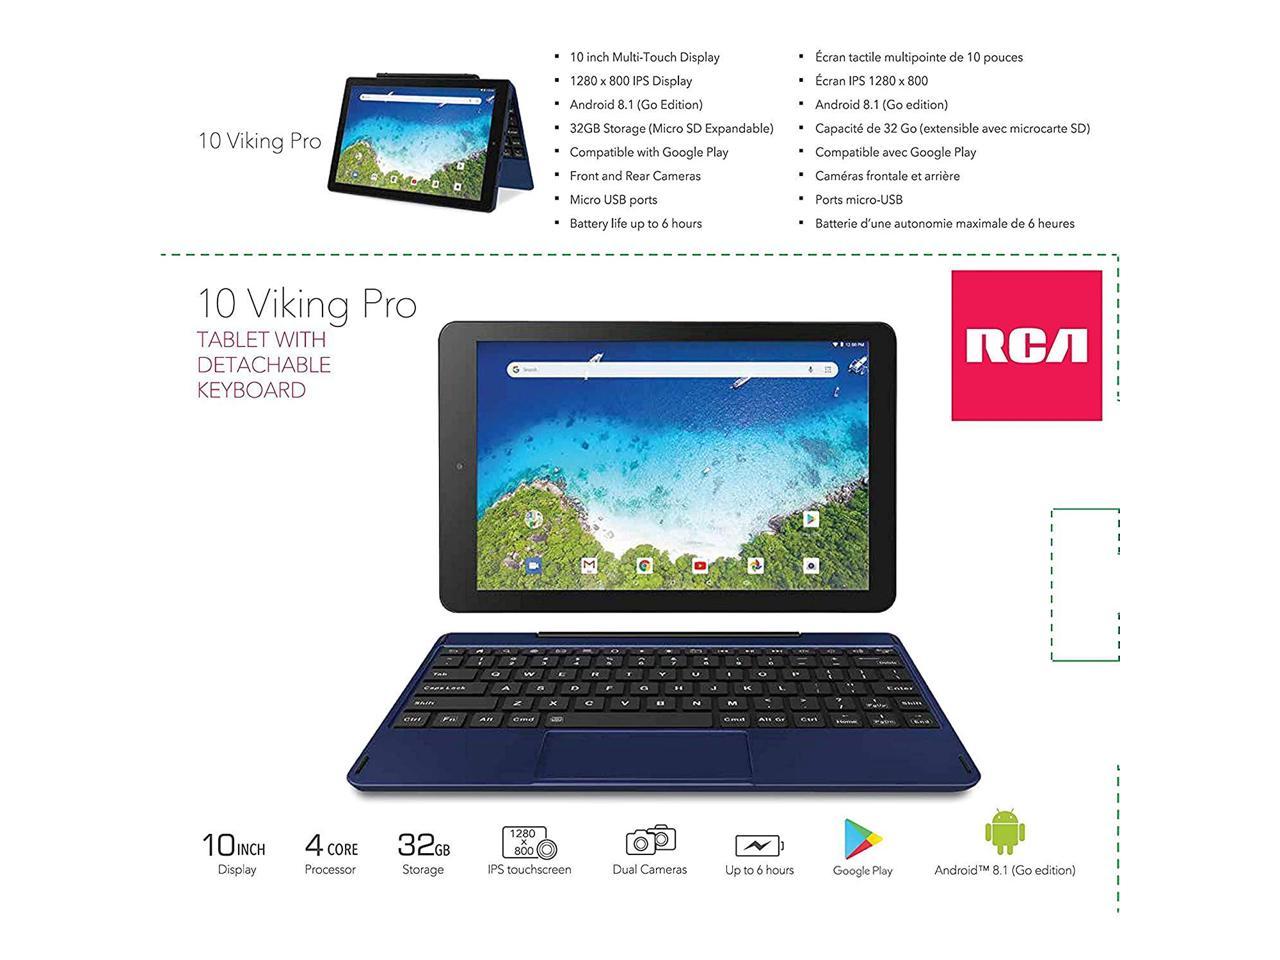 windows 10 download for rca viking pro 10.1